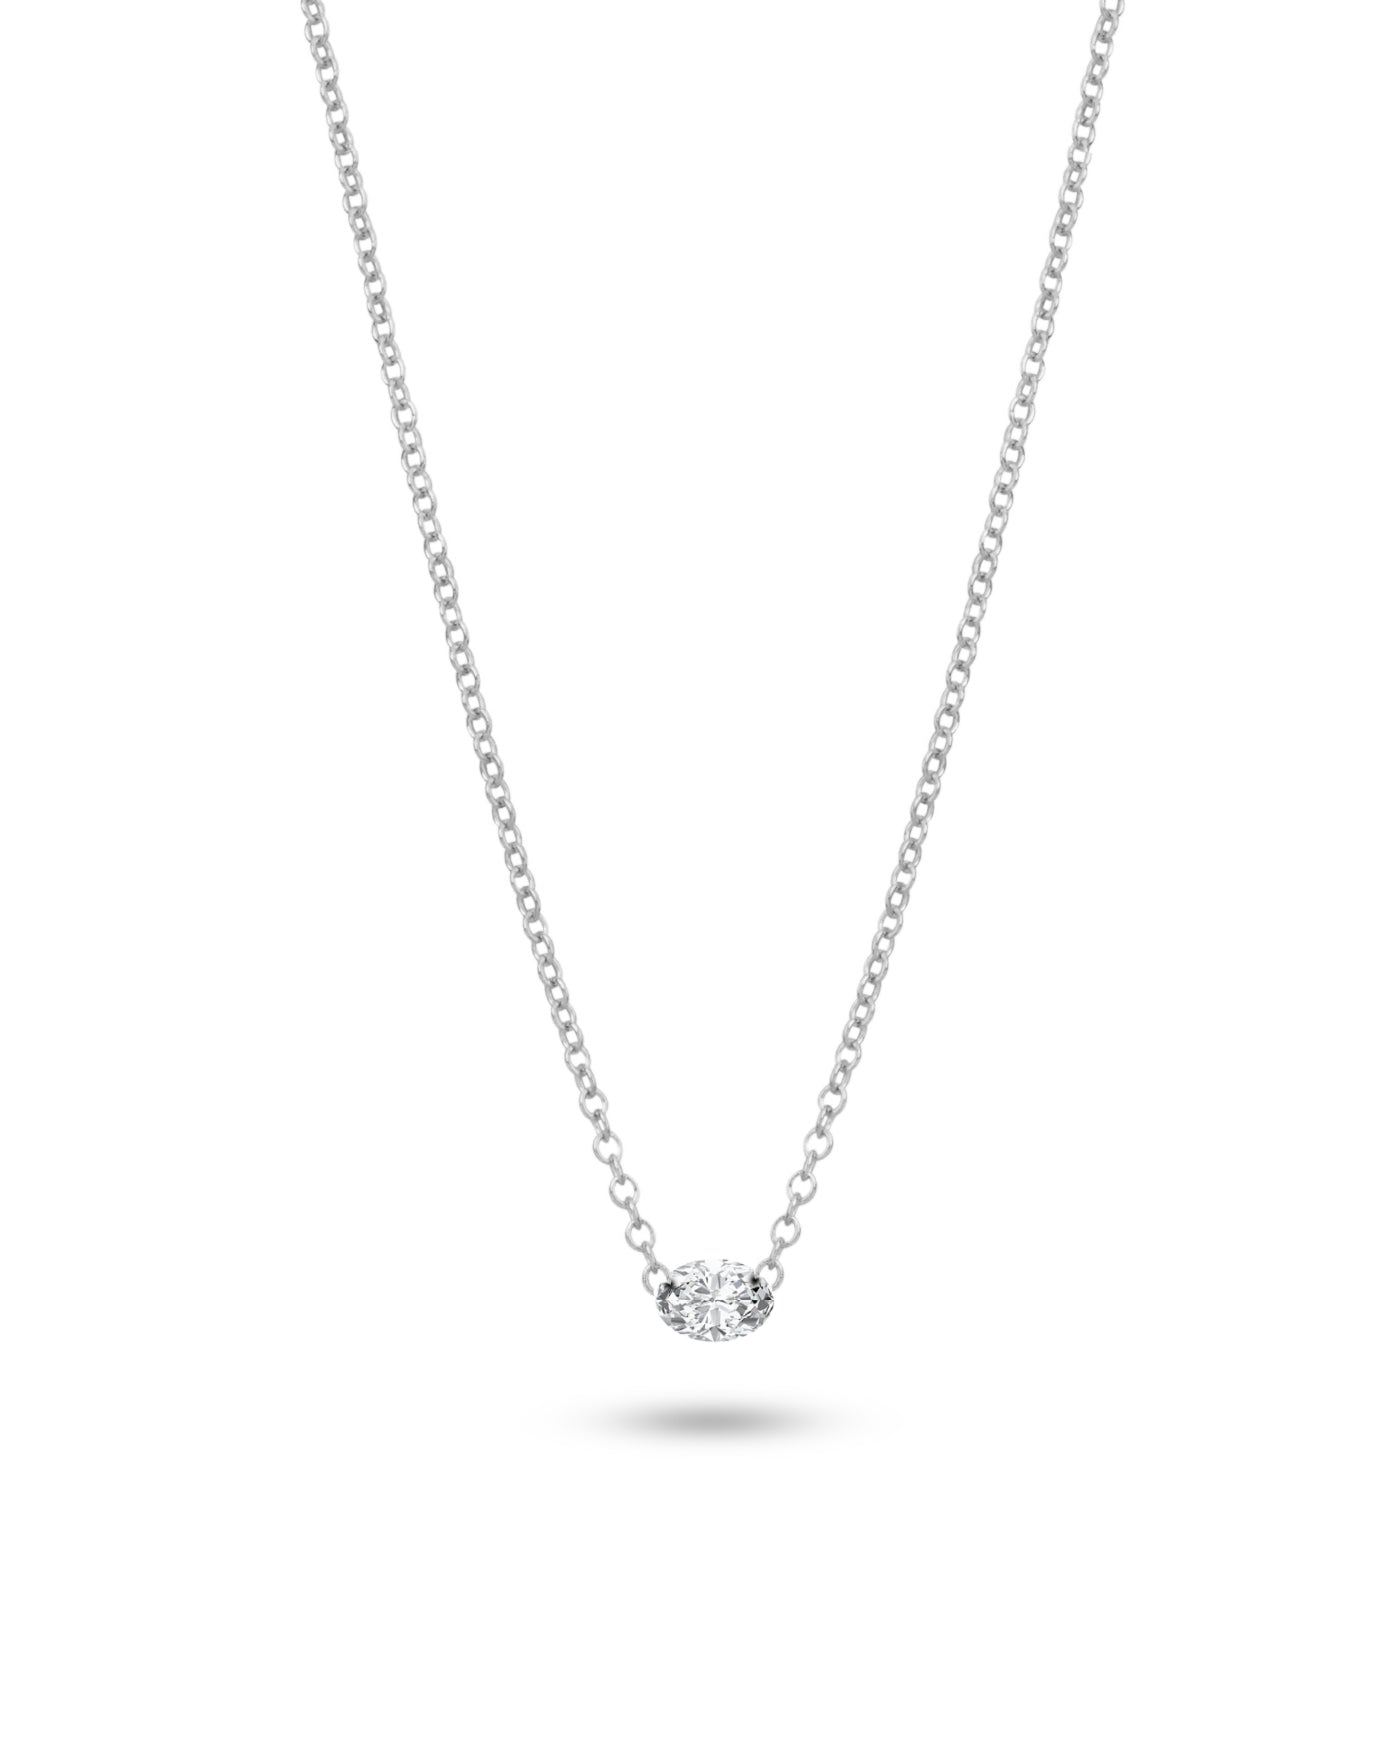 Drilled Diamond Necklace | Round Cut 0.26cts